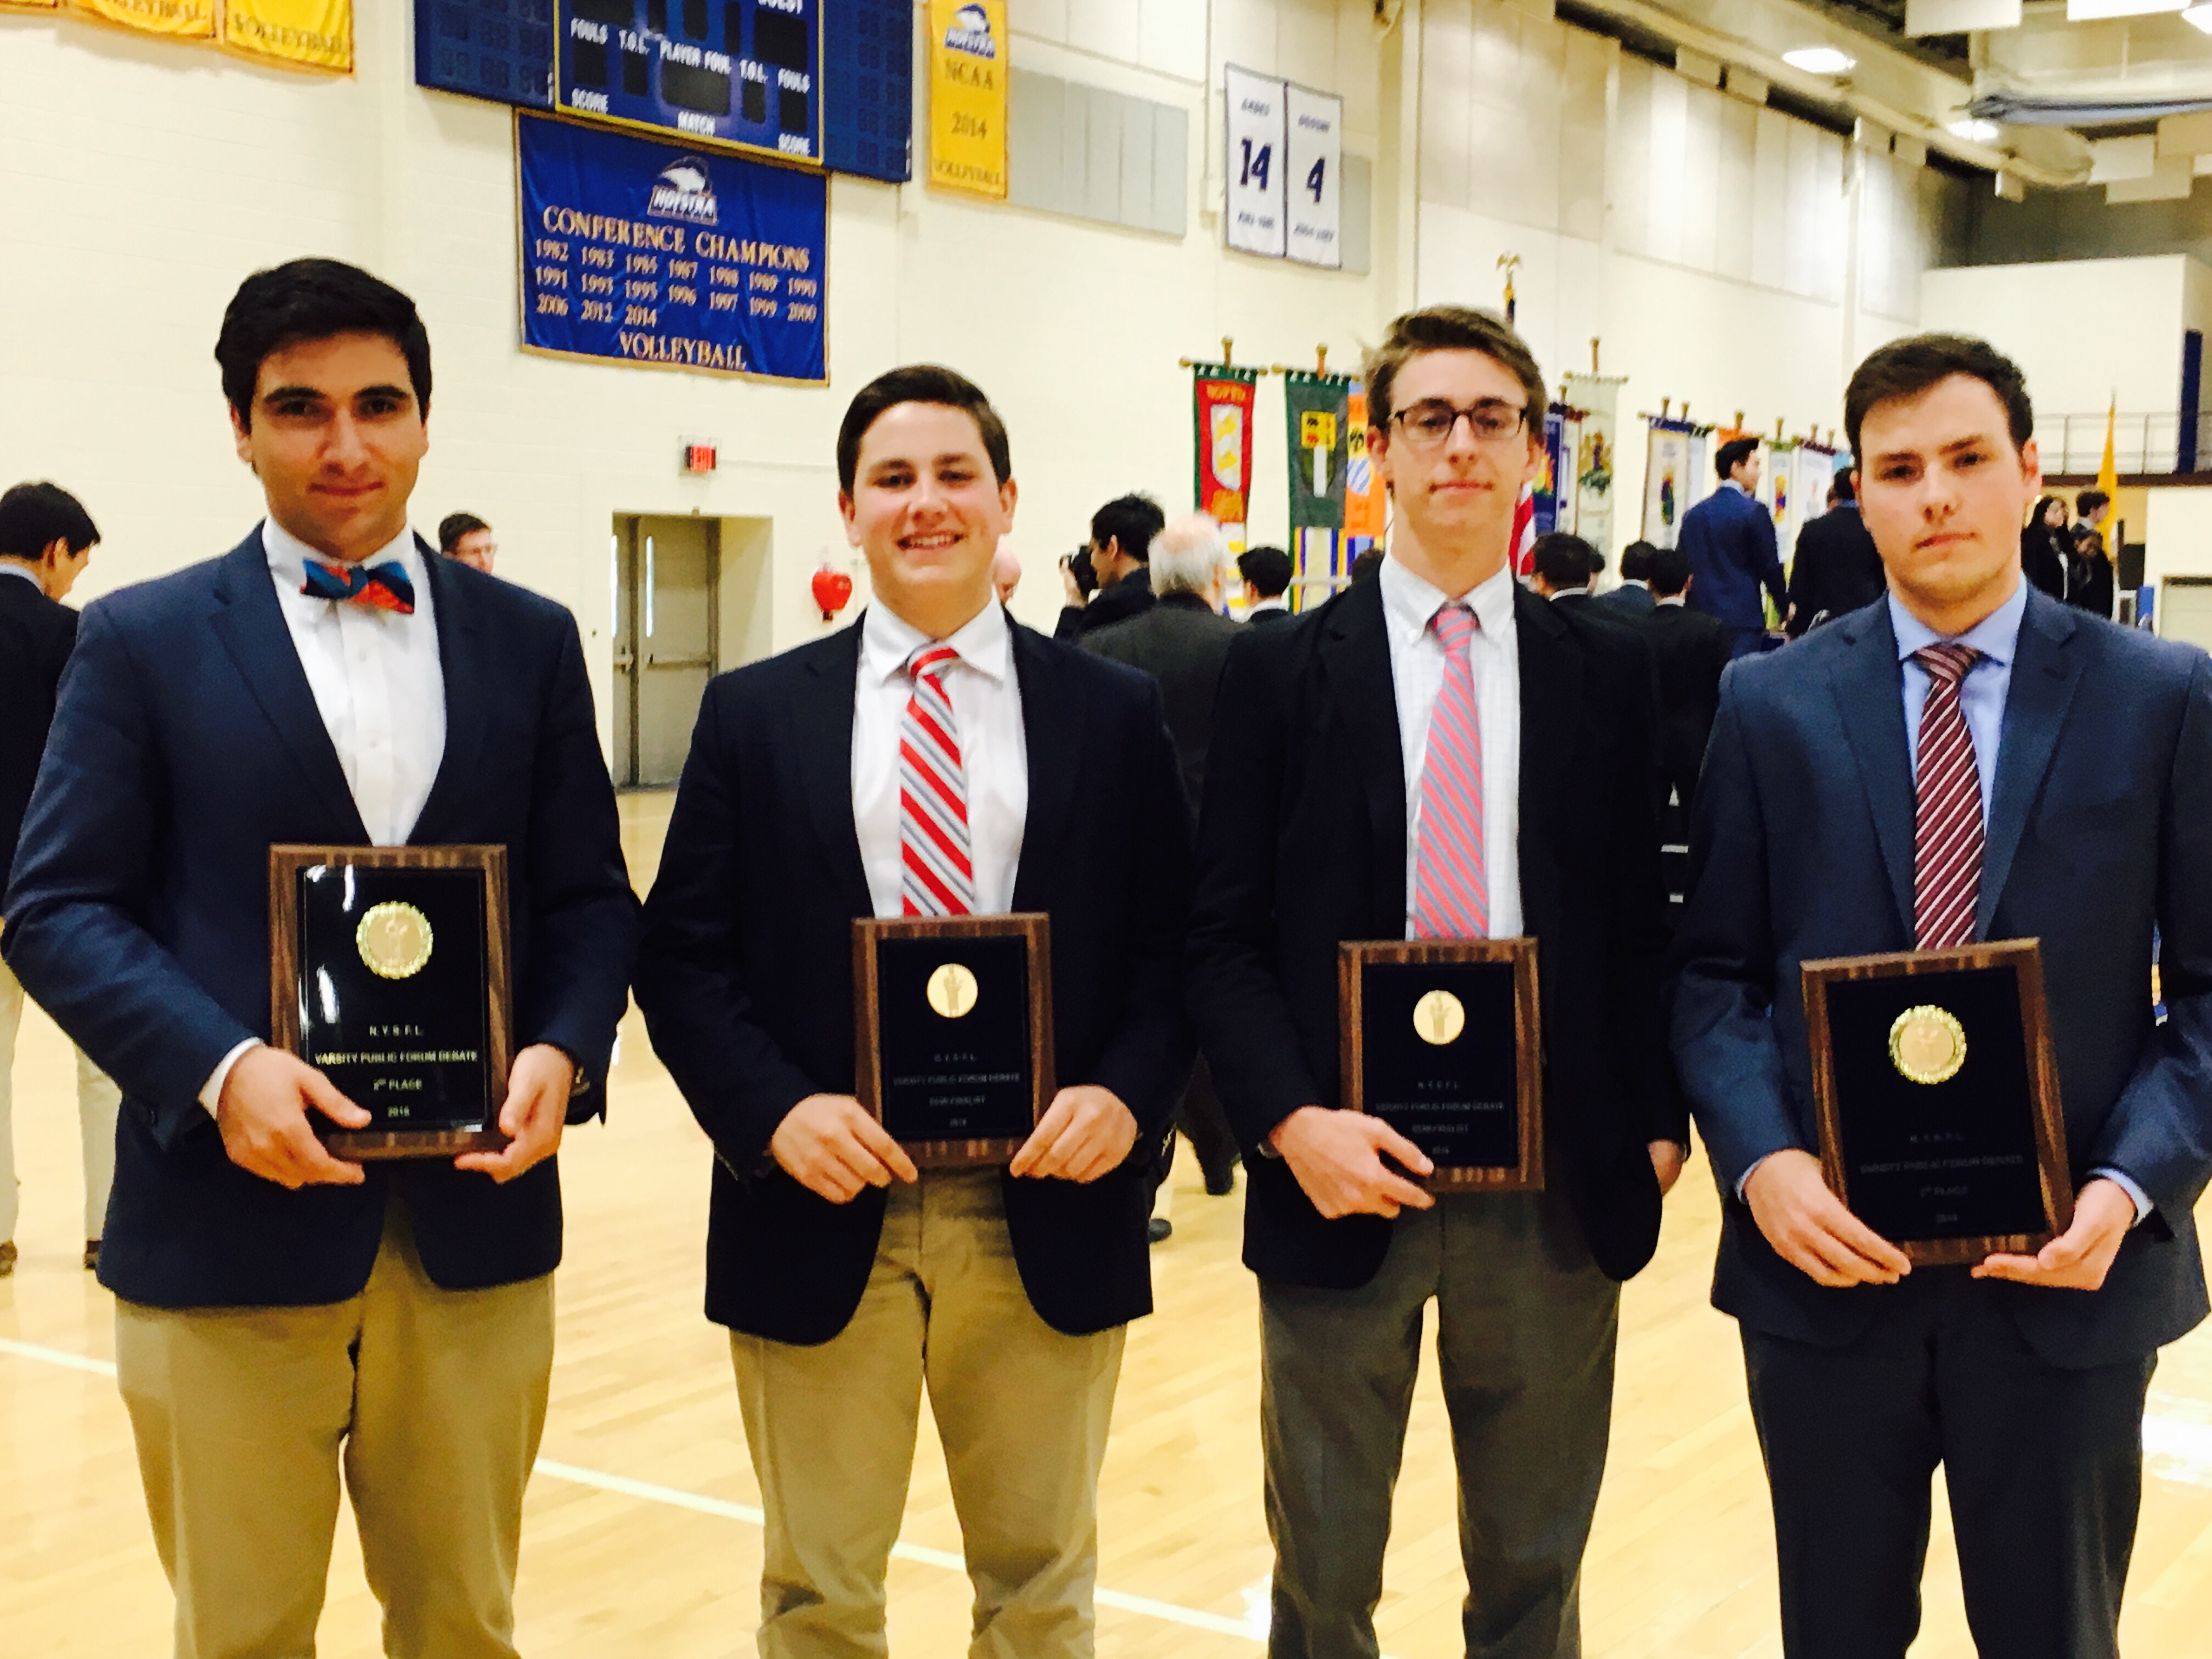 After four years of hard work, seniors Peter Charalambous, Anthony Sikorski, Rob Wines, and Brendan Owens receive awards placing them among the best debaters in New York state.  